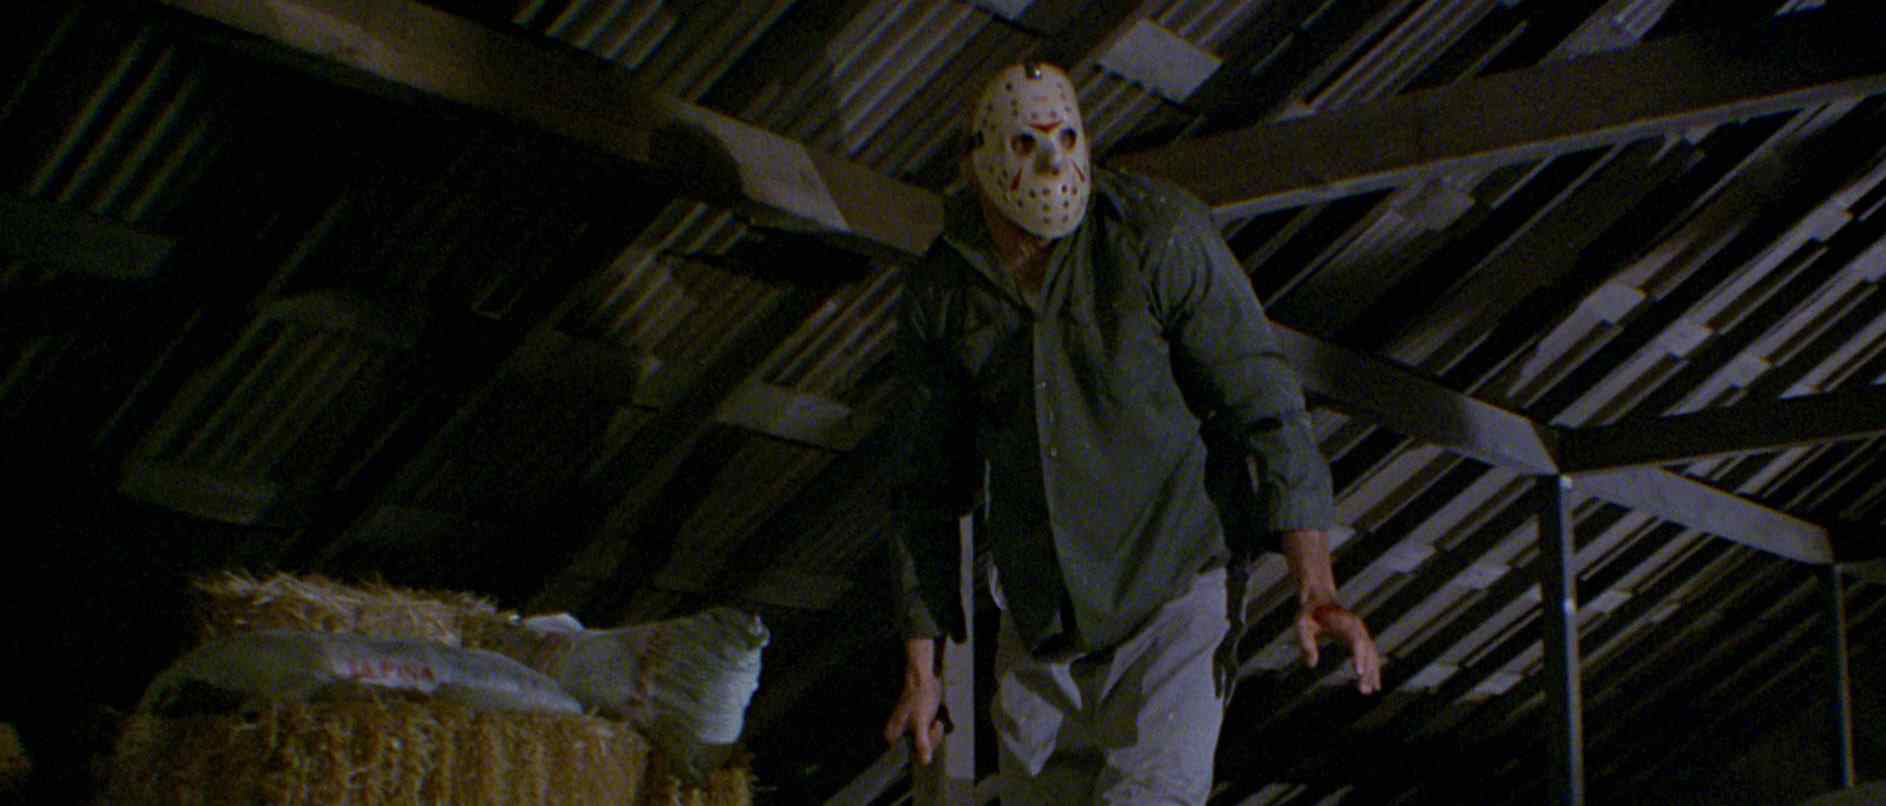 Jason in Friday the 13th Part III